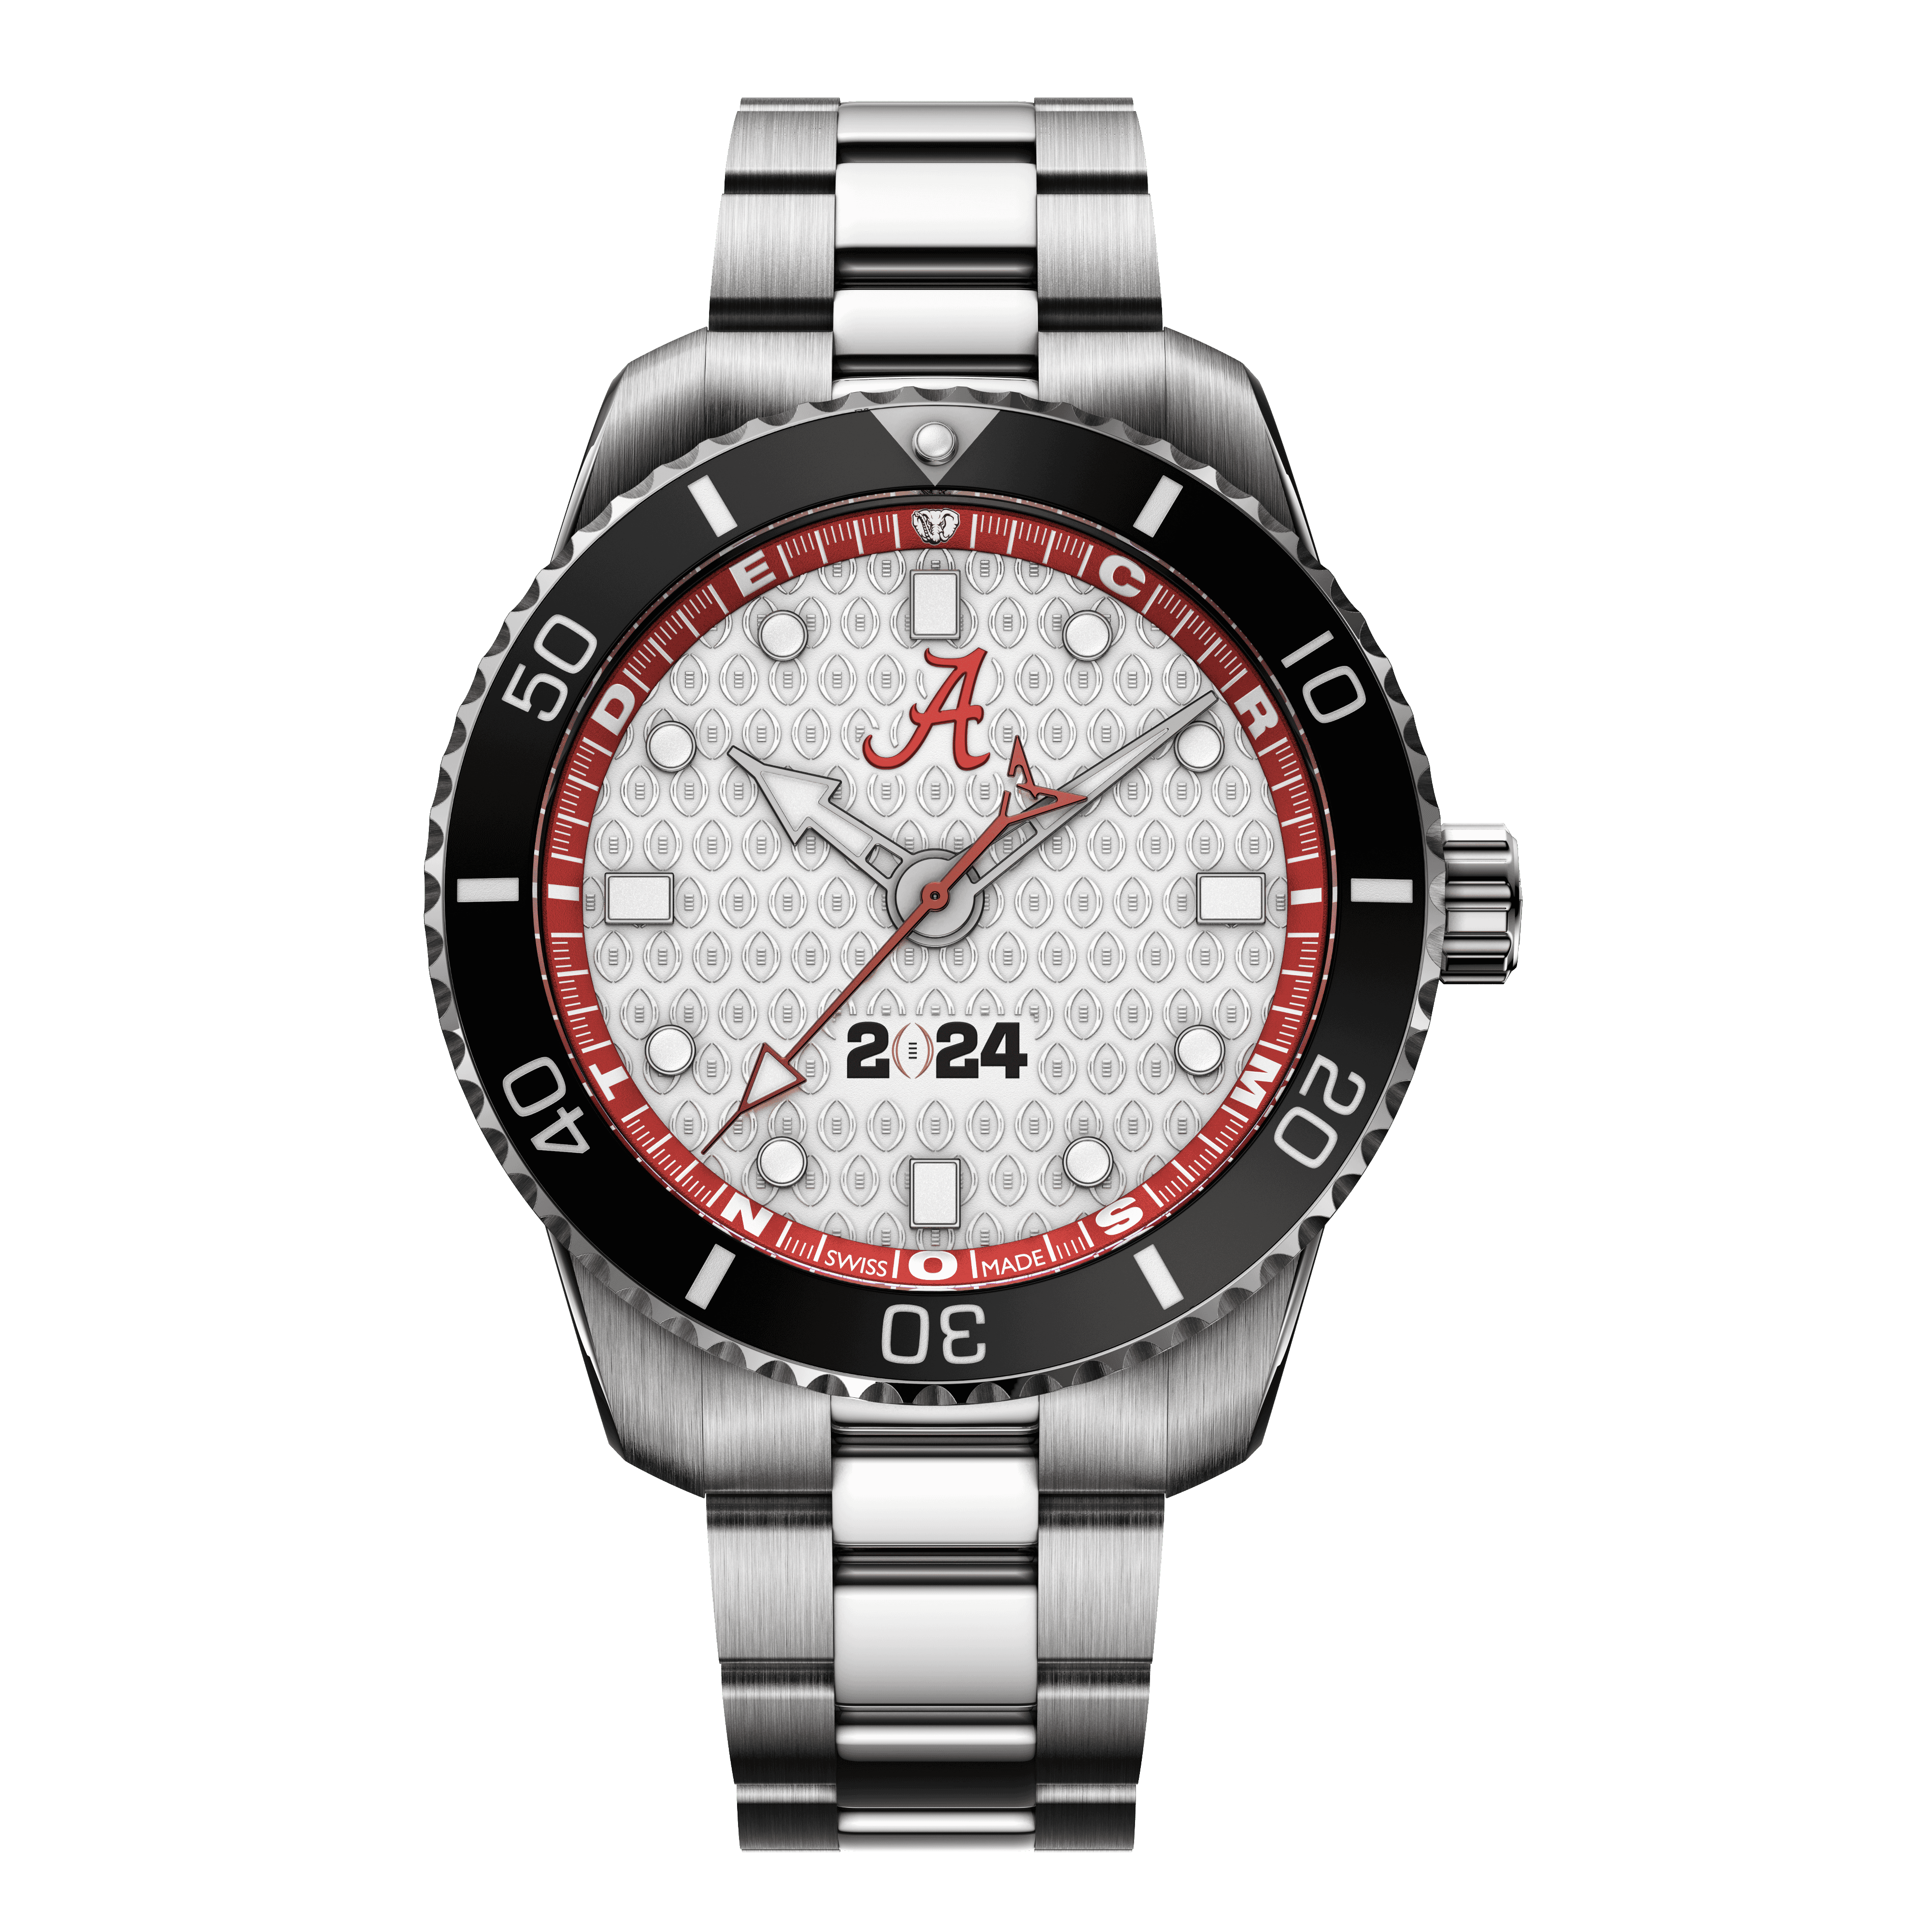 Alabama Crimson Tide Swiss made automatic watch Front View